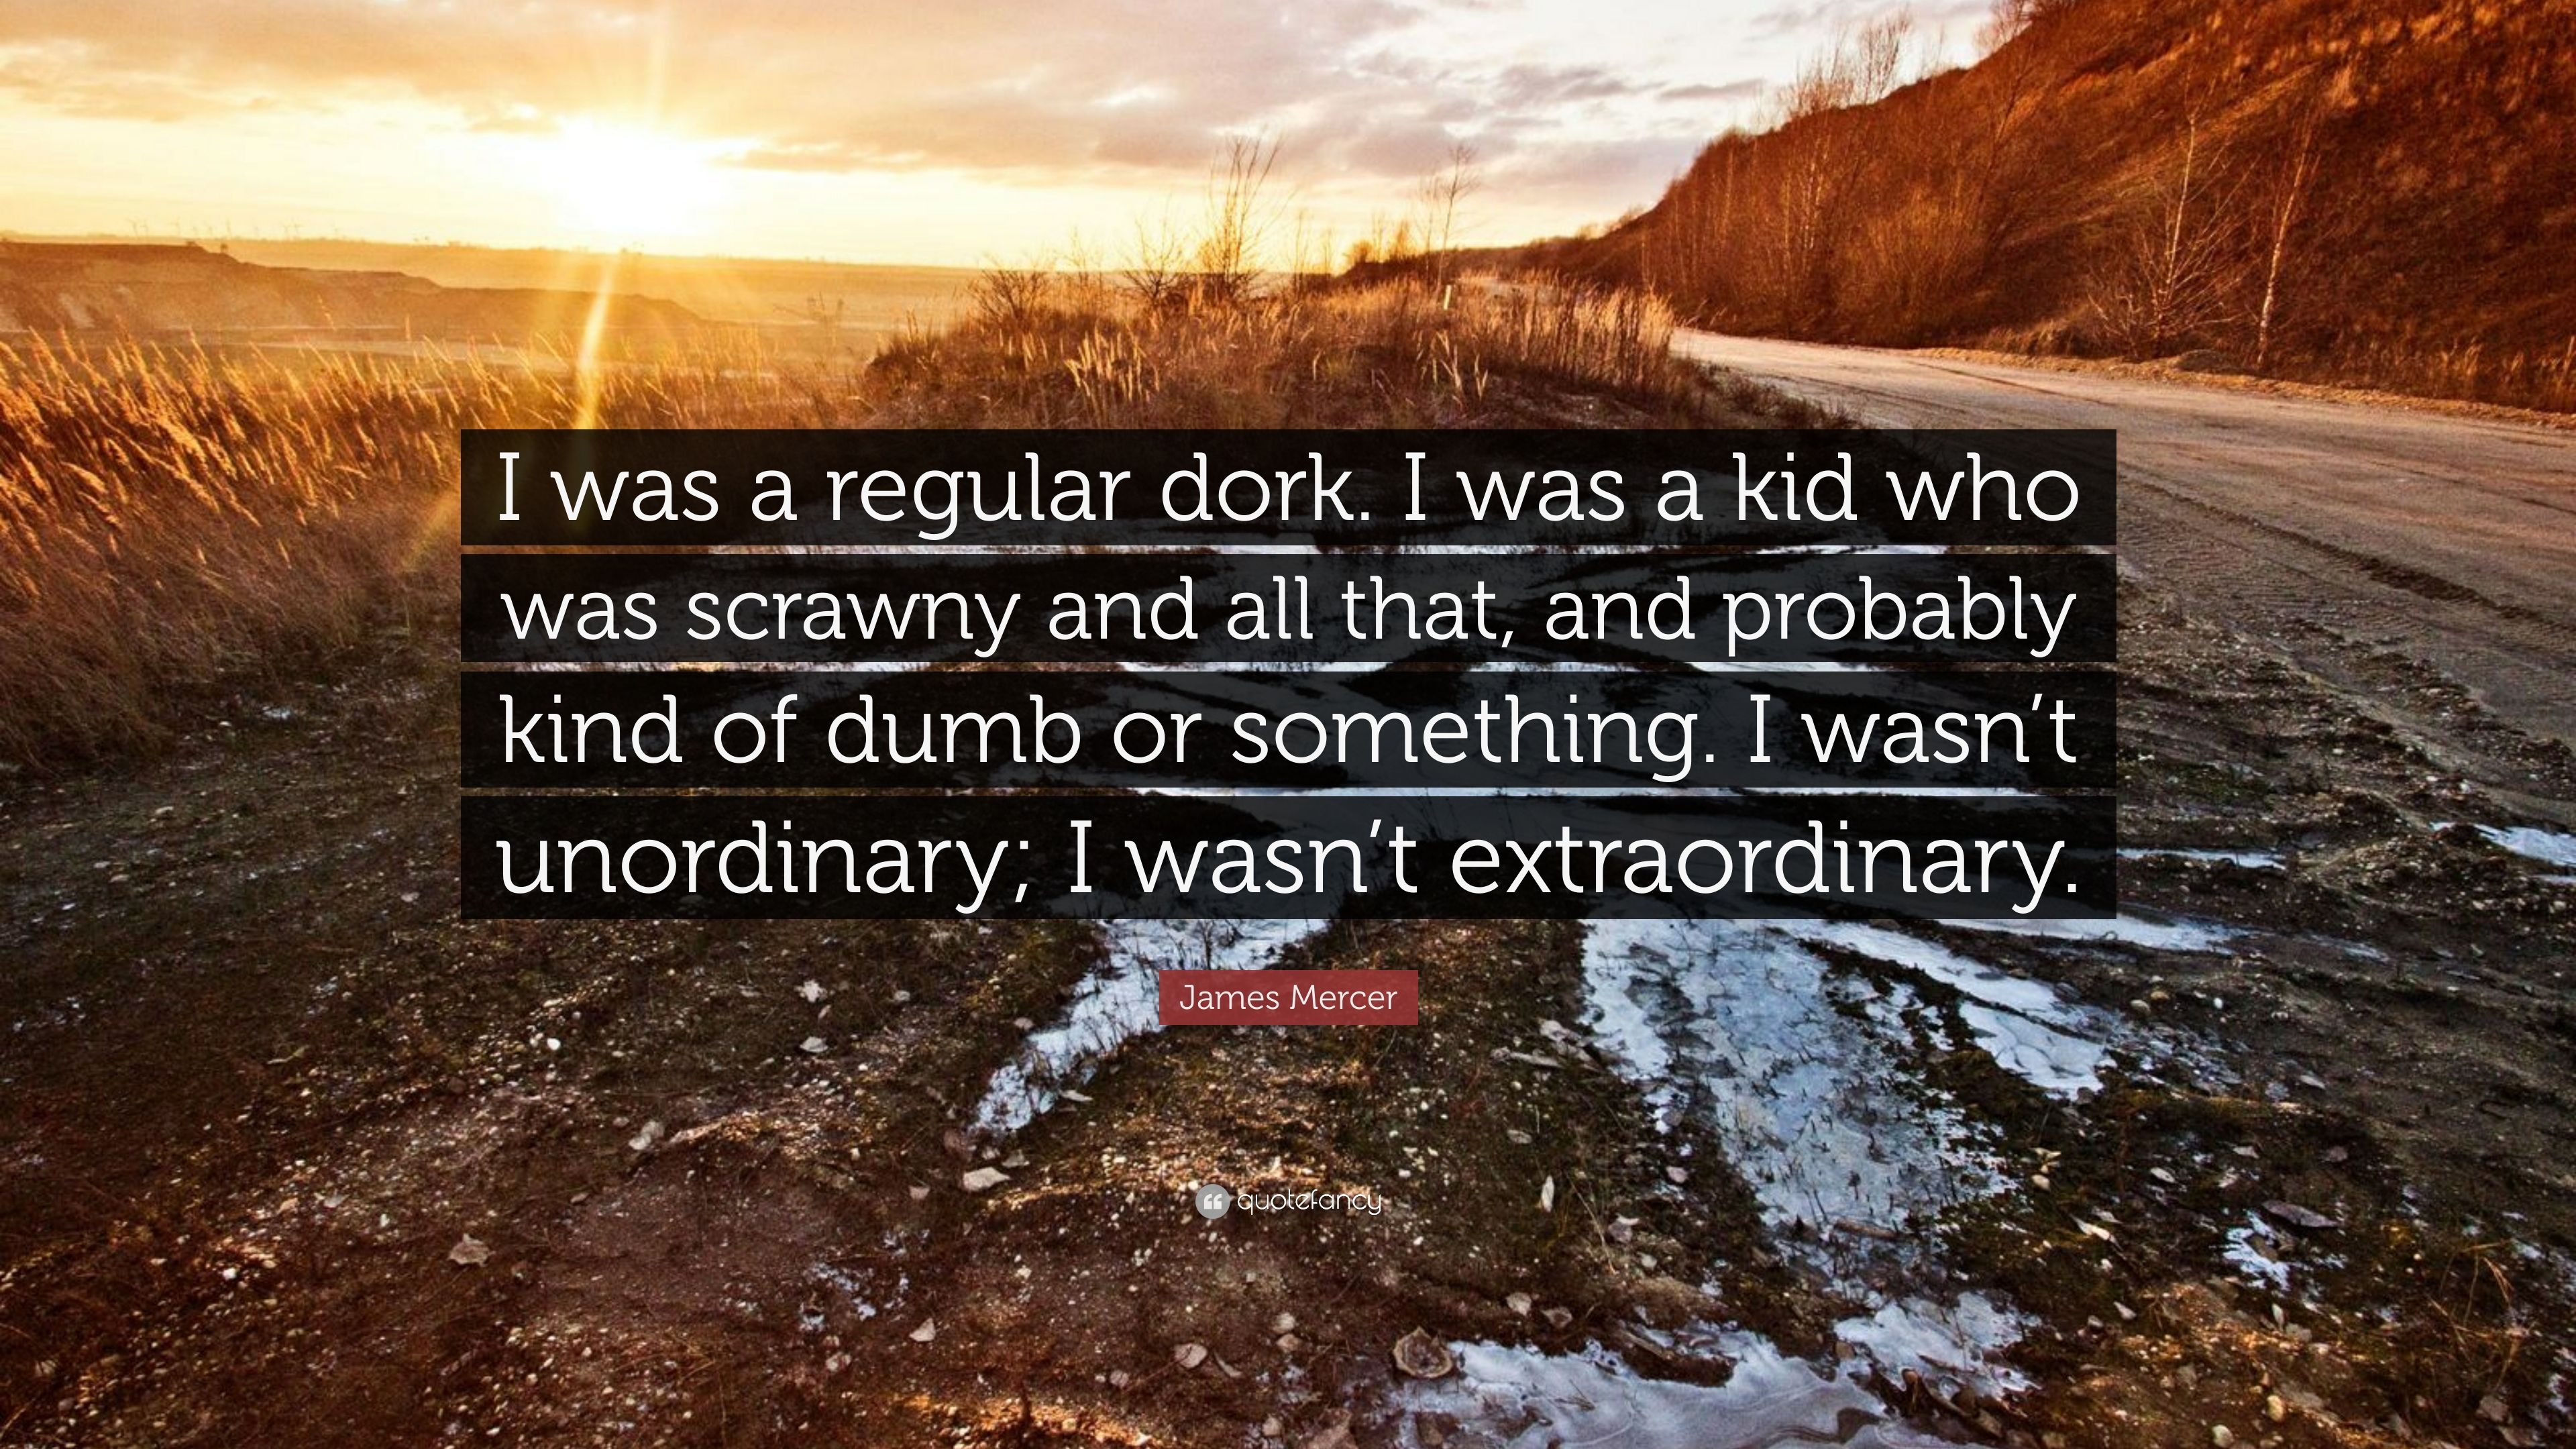 James Mercer Quote: “I was a regular dork. I was a kid who was